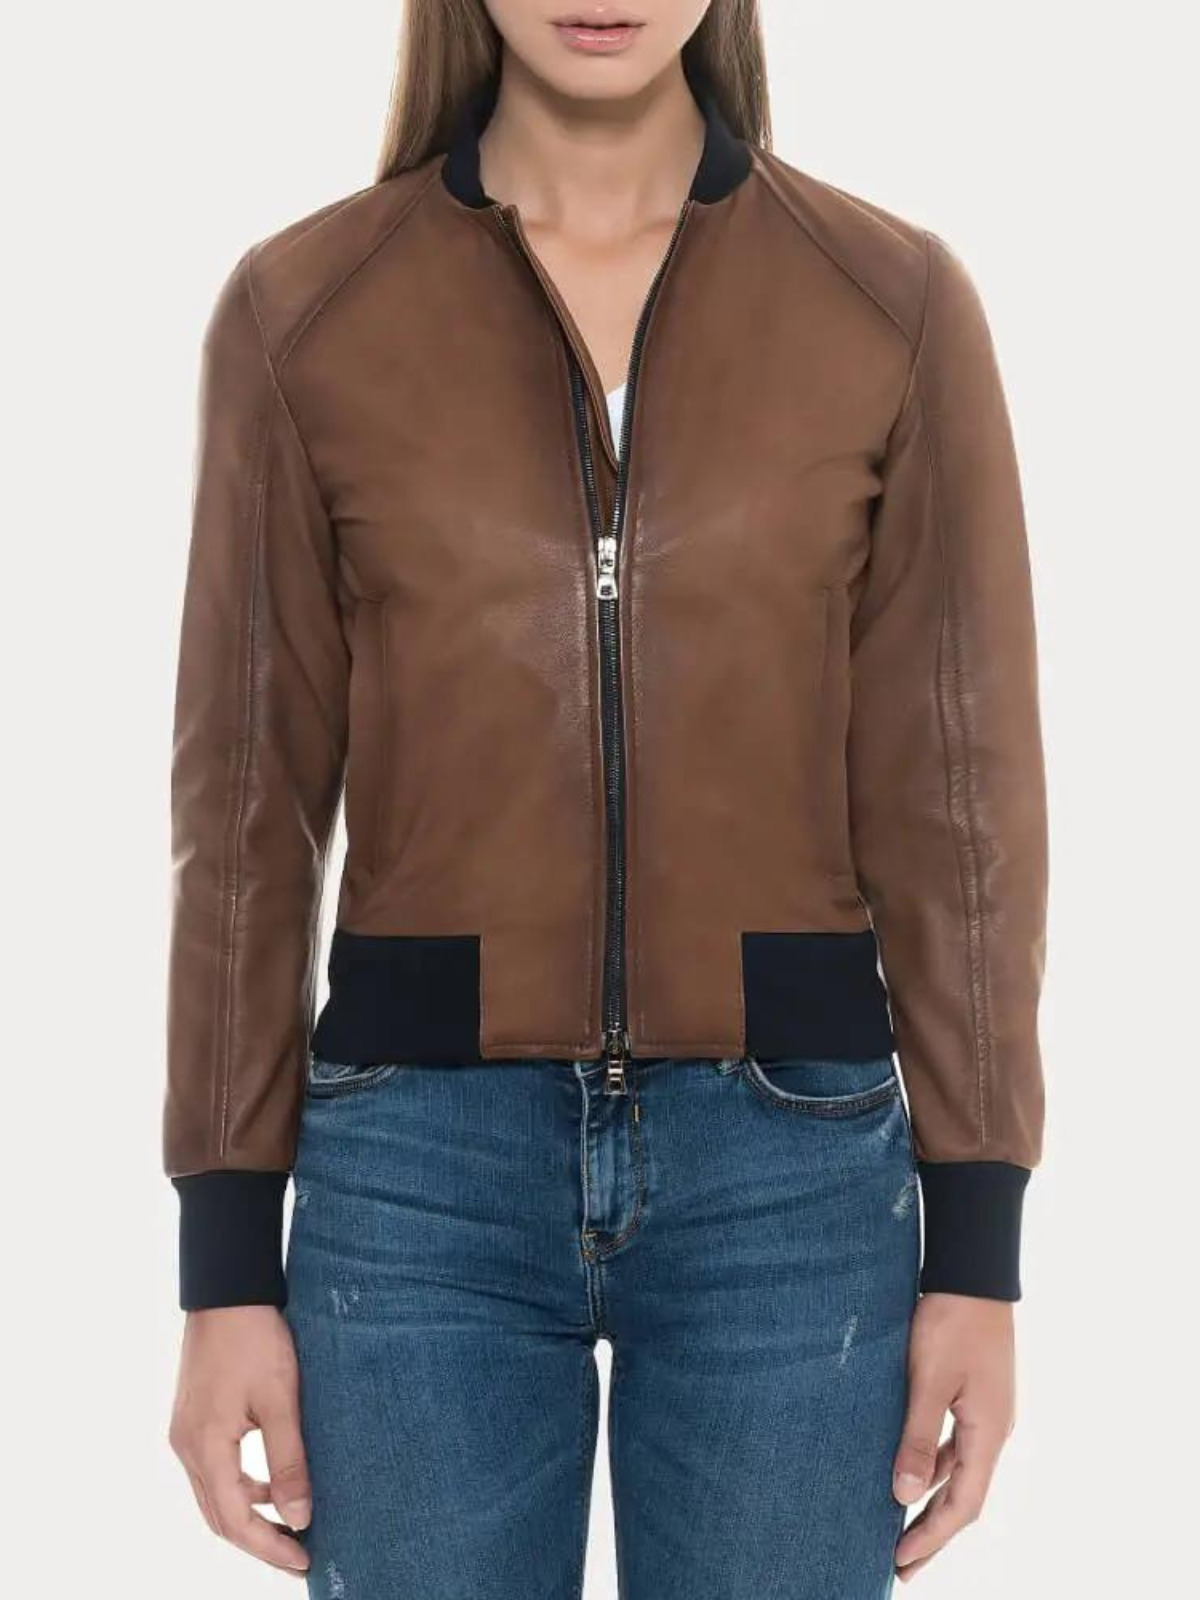 womens-sugar-brown-lambskin-bomber-jacket-high-quality-leather-at-affordable-prices (1)